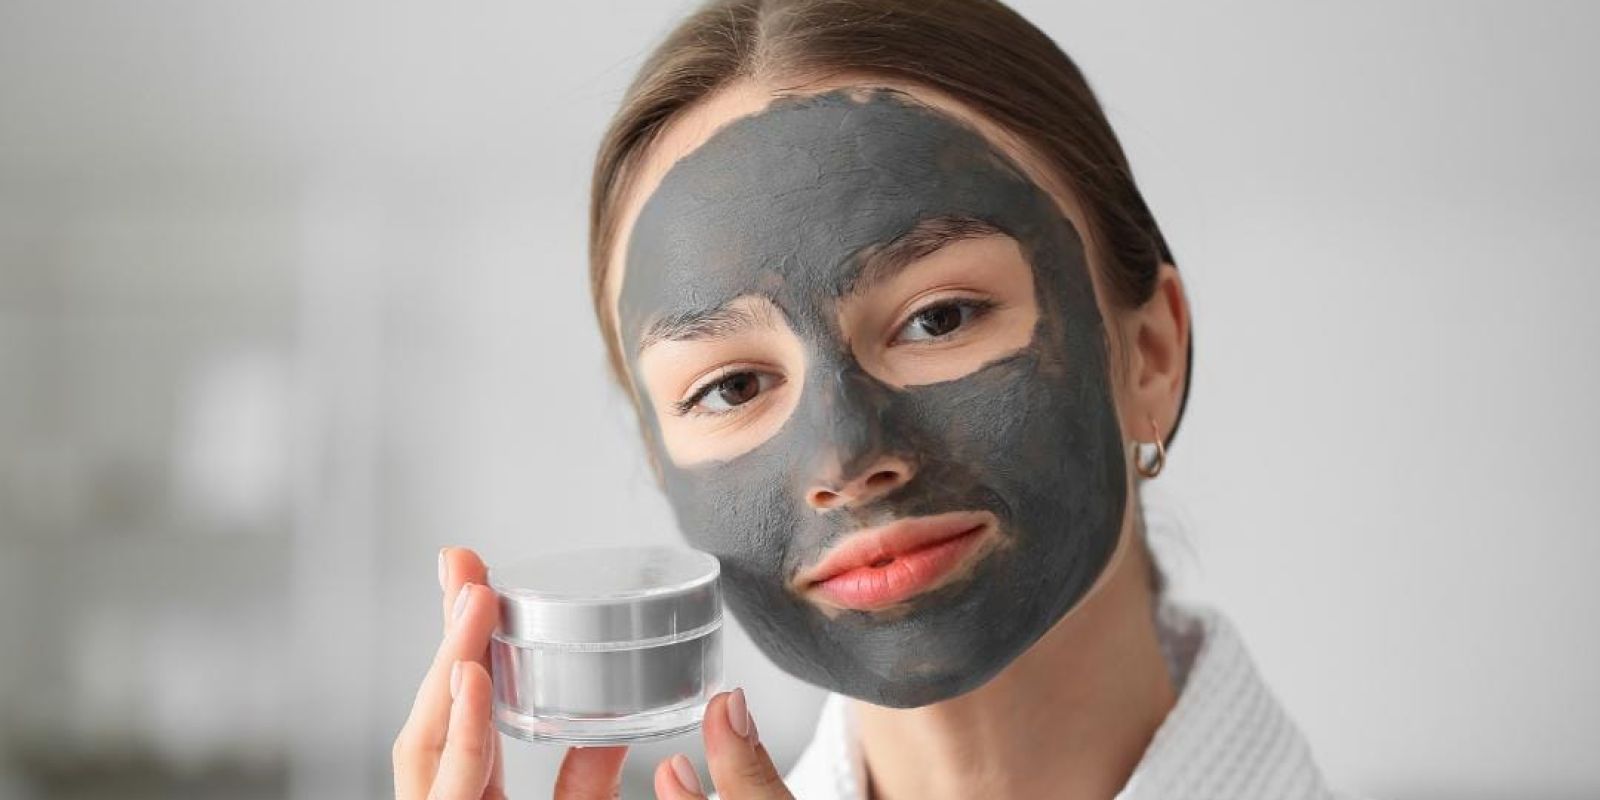 Is Bamboo Charcoal Good for Skin? – KNESKO